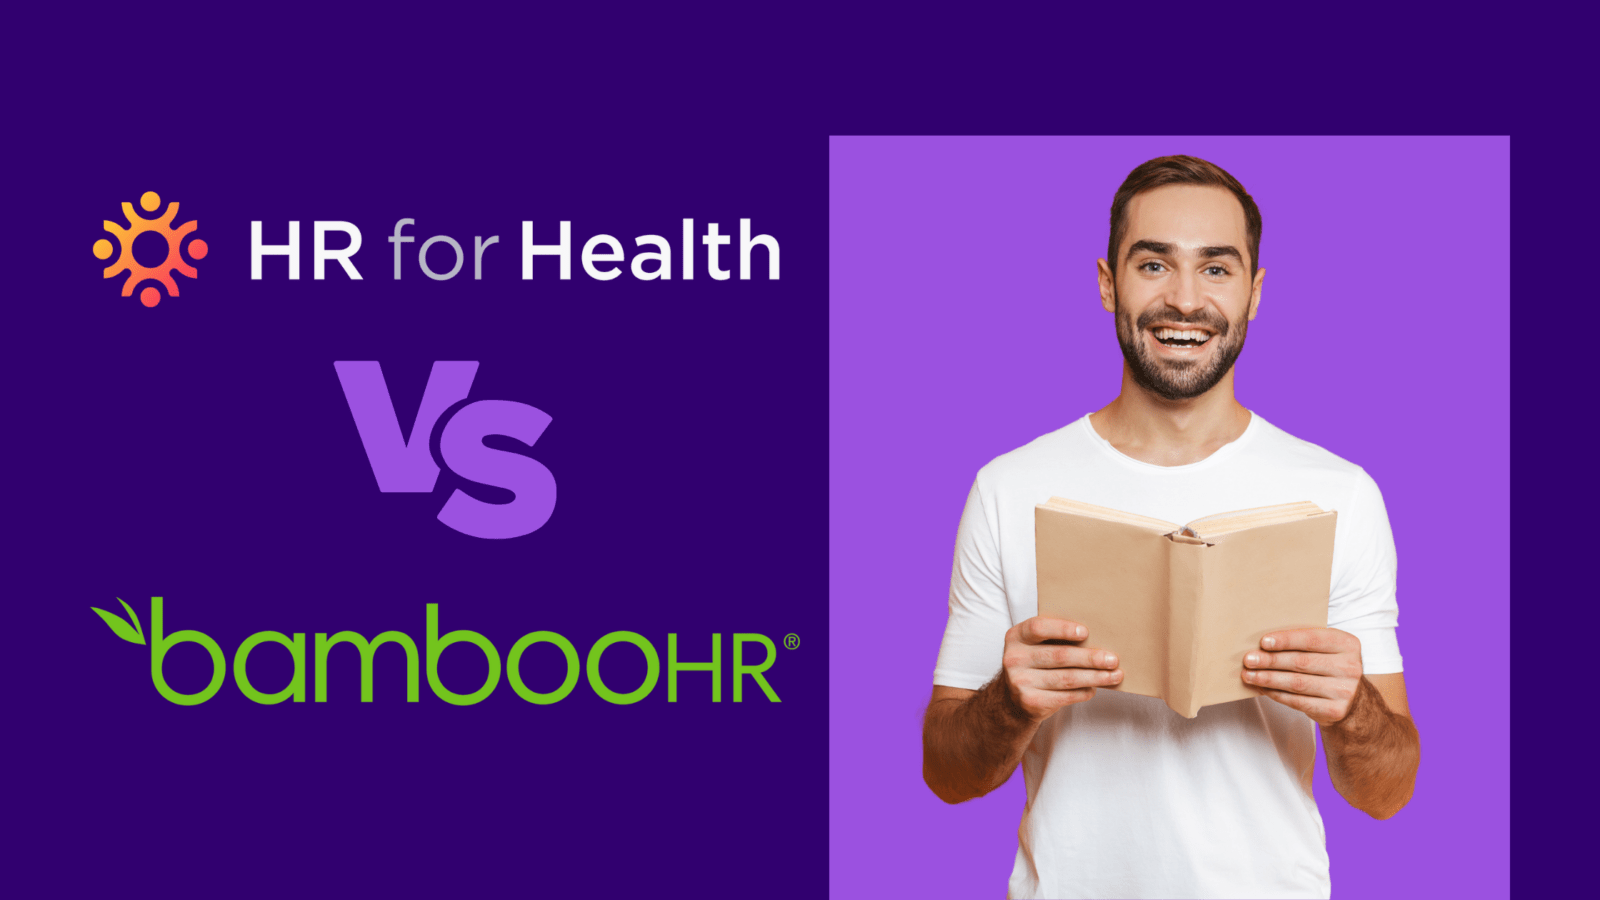 HR for Health Software vs. BambooHR: An Overview